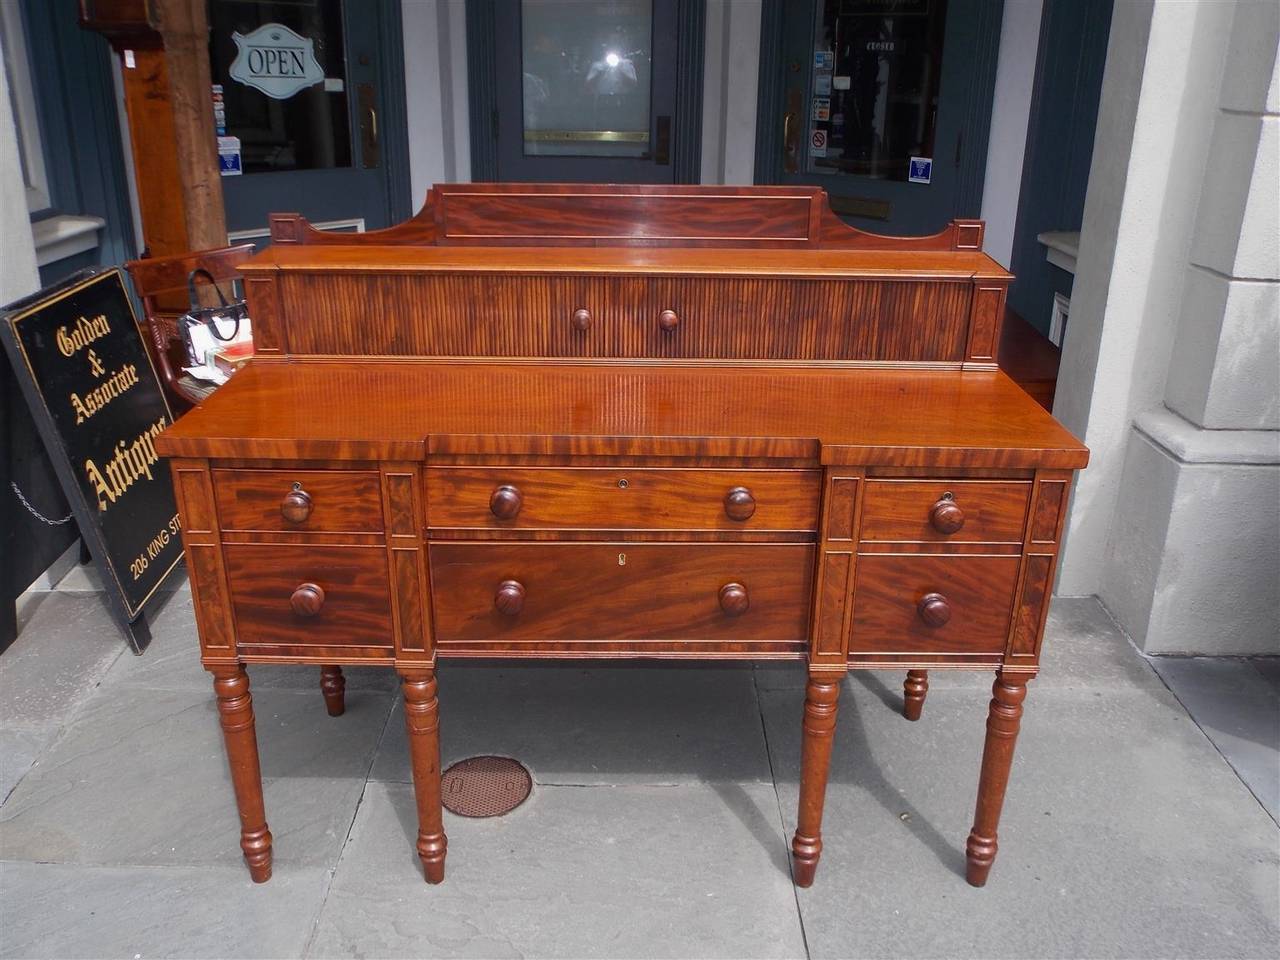 English Regency mahogany sideboard with scalloped tambour top back splash, ribbon mahogany molded edge panels, two over two lower case center drawers and flanking cellarette drawers with the original wooden knobs and terminating on the original